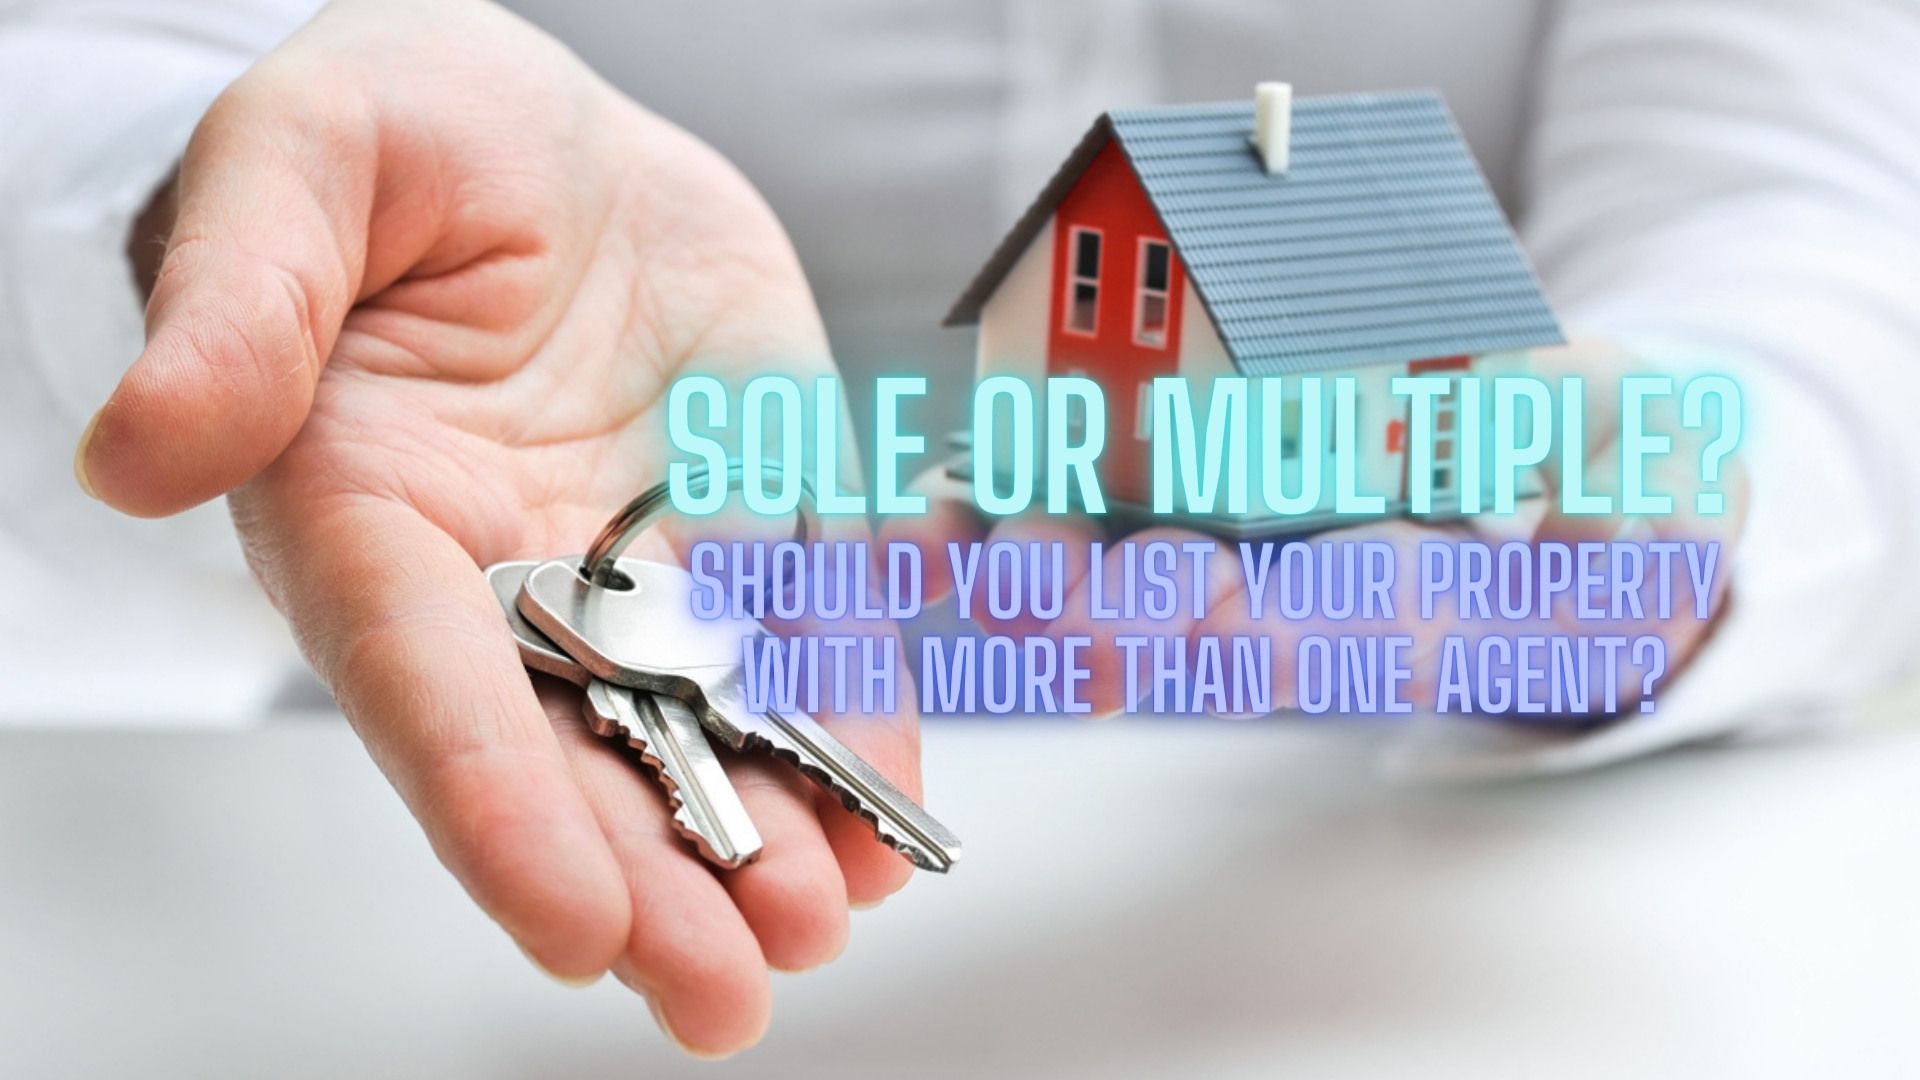 Sole Or Multiple: Should You List Your Property With More Than One Agent?